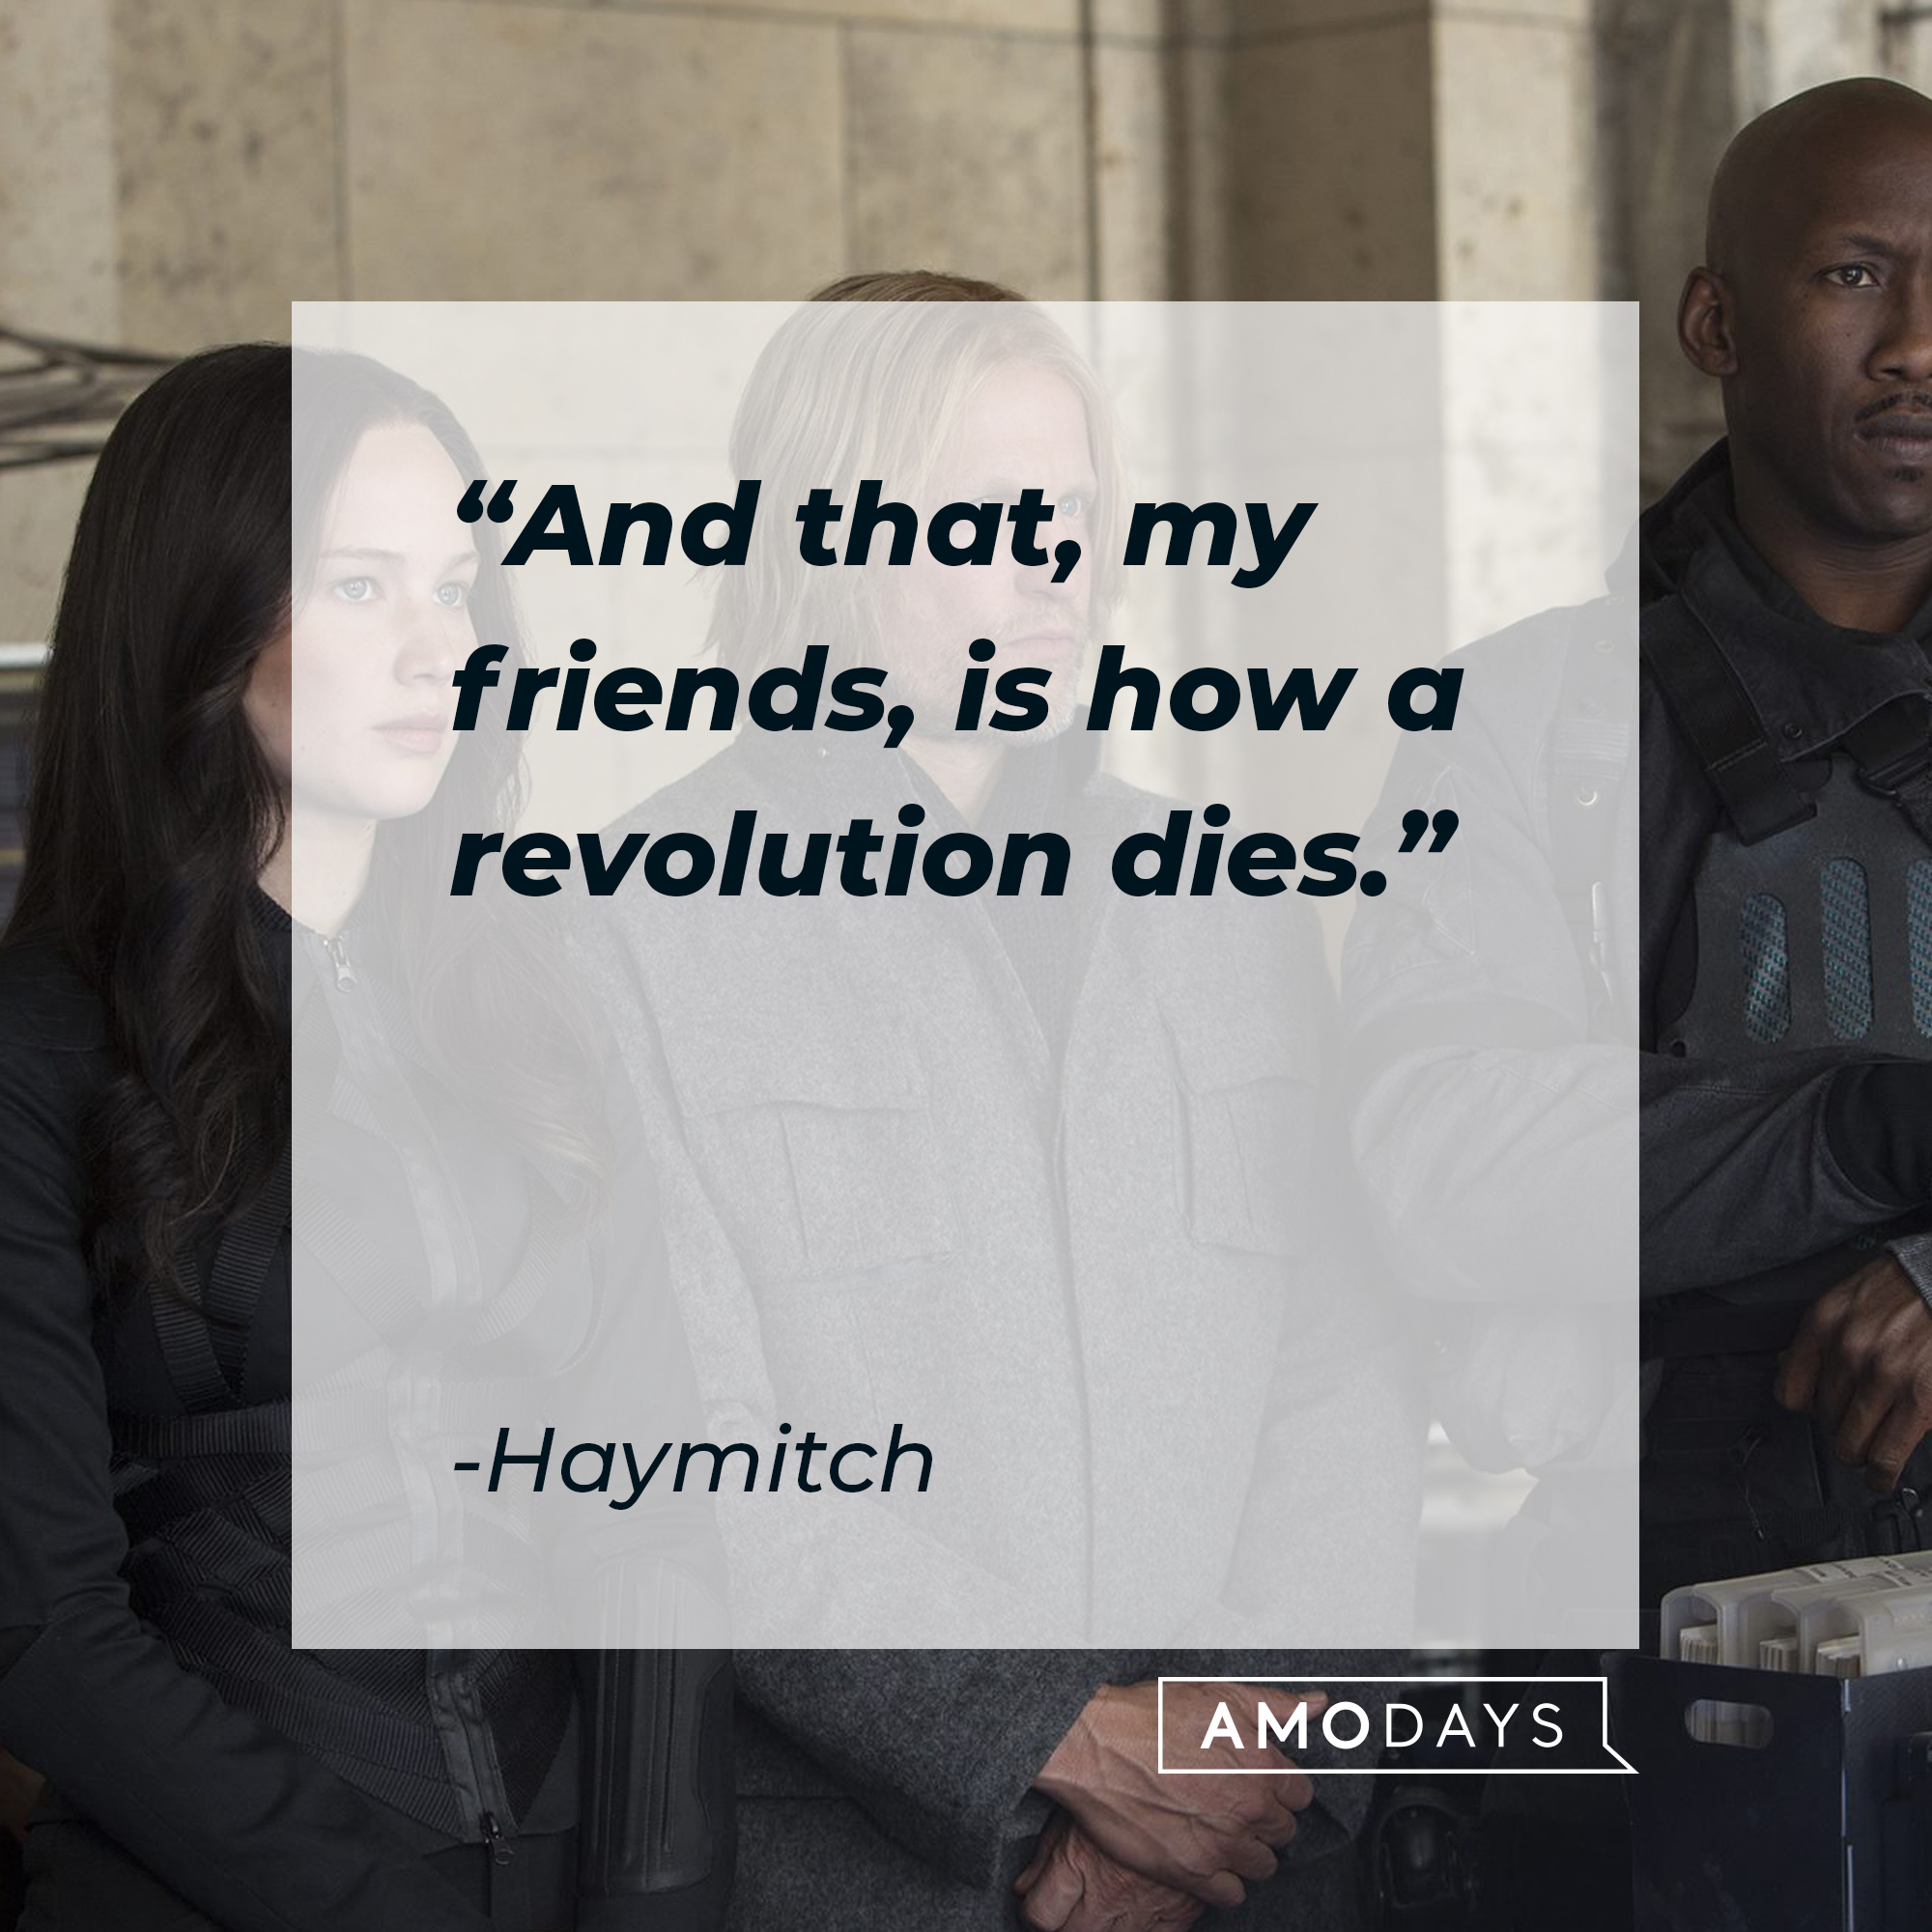 Haymitch's quote: "And that, my friends, is how a revolution dies." | Source: facebook.com/TheHungerGamesMovie